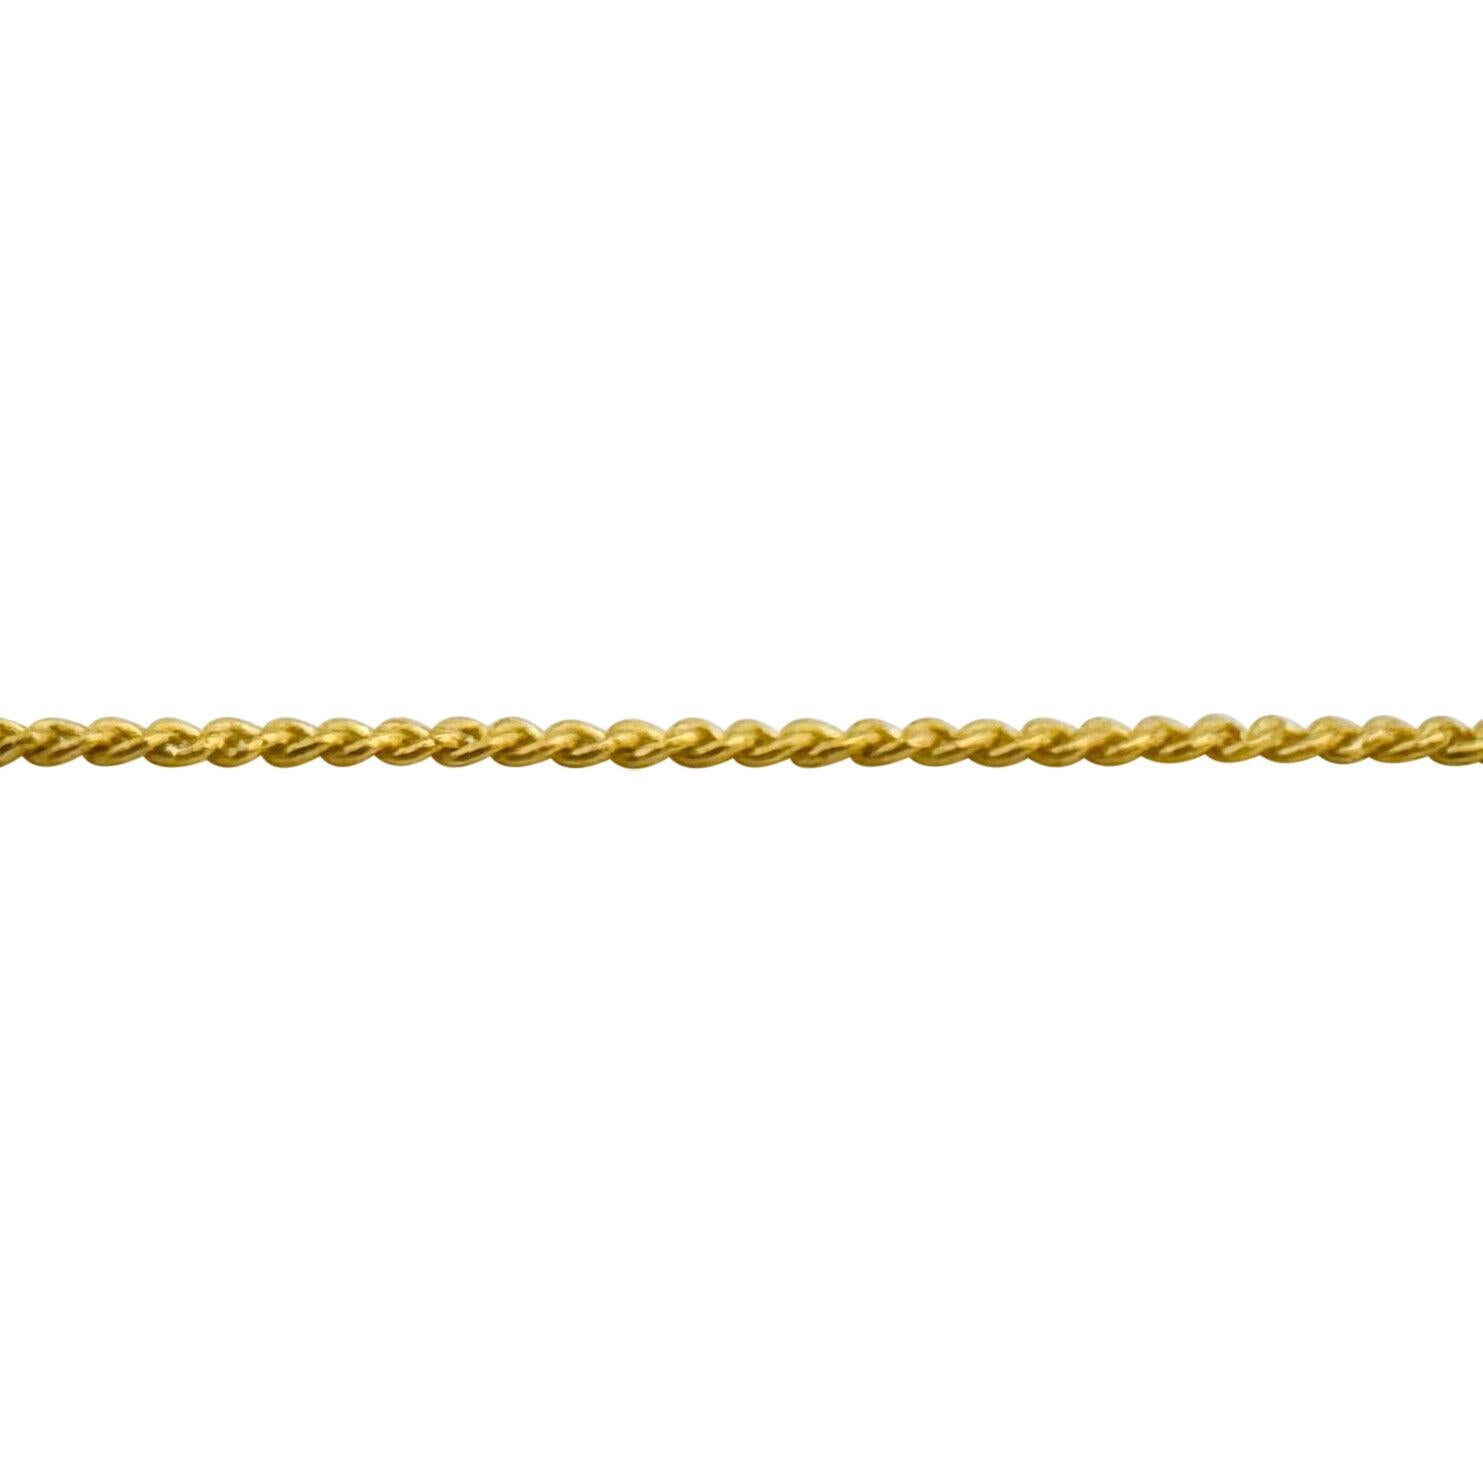 Women's or Men's 24 Karat Pure Yellow Gold Solid Thin Curb Link Chain Necklace 